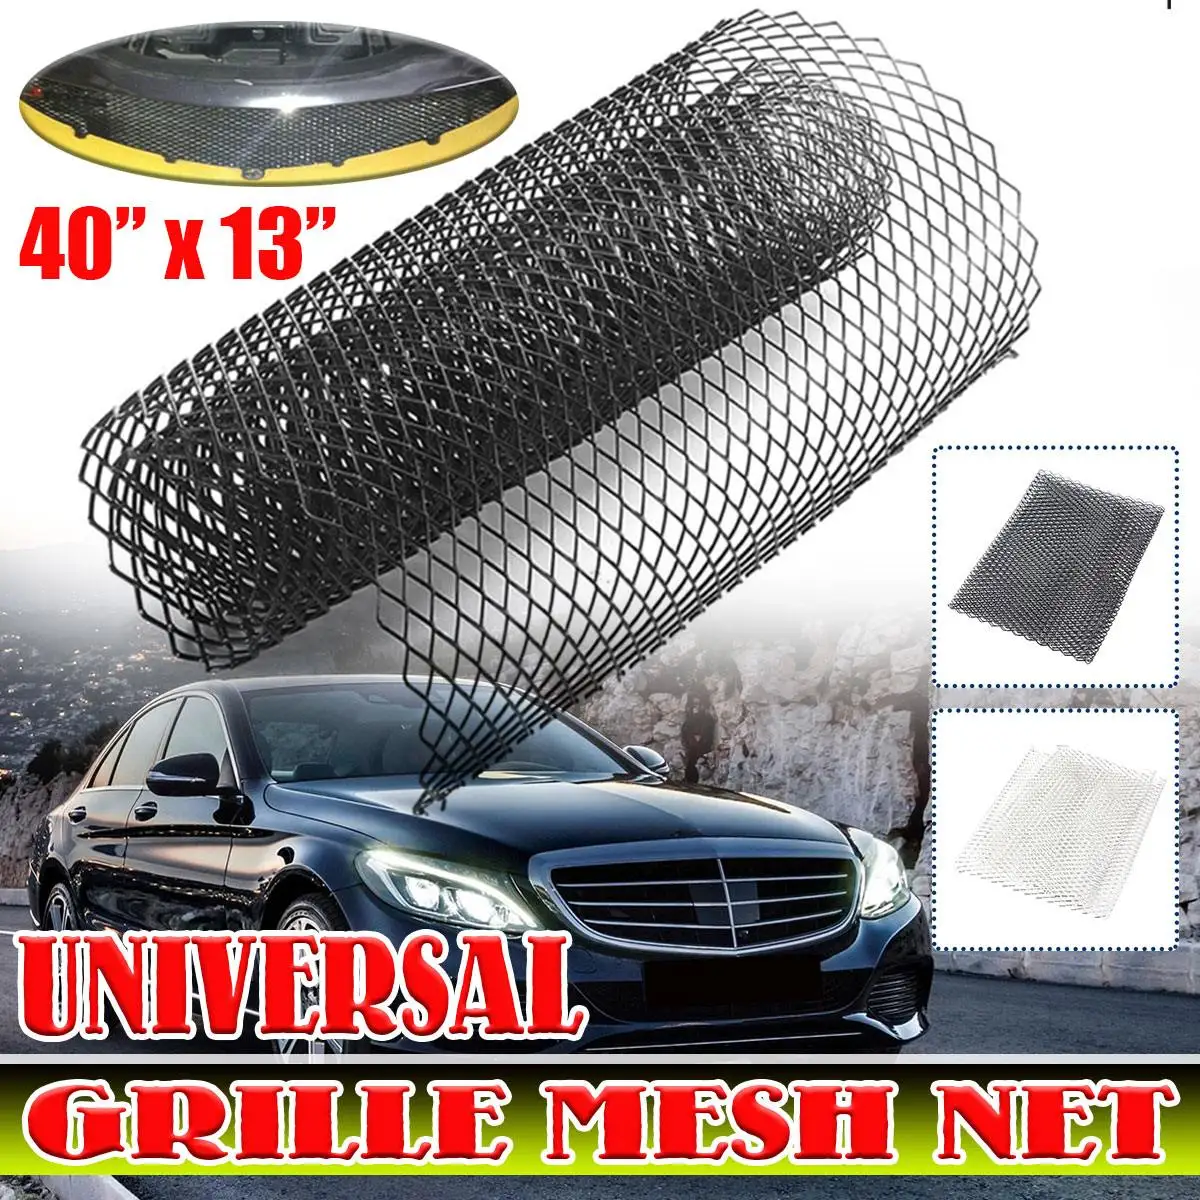 

100cmx33cm Universal Aluminium Racing Vehicle Car Grille Mesh Vent Car Tuning Styling Grille Net Mesh Section Mesh Grille Grill